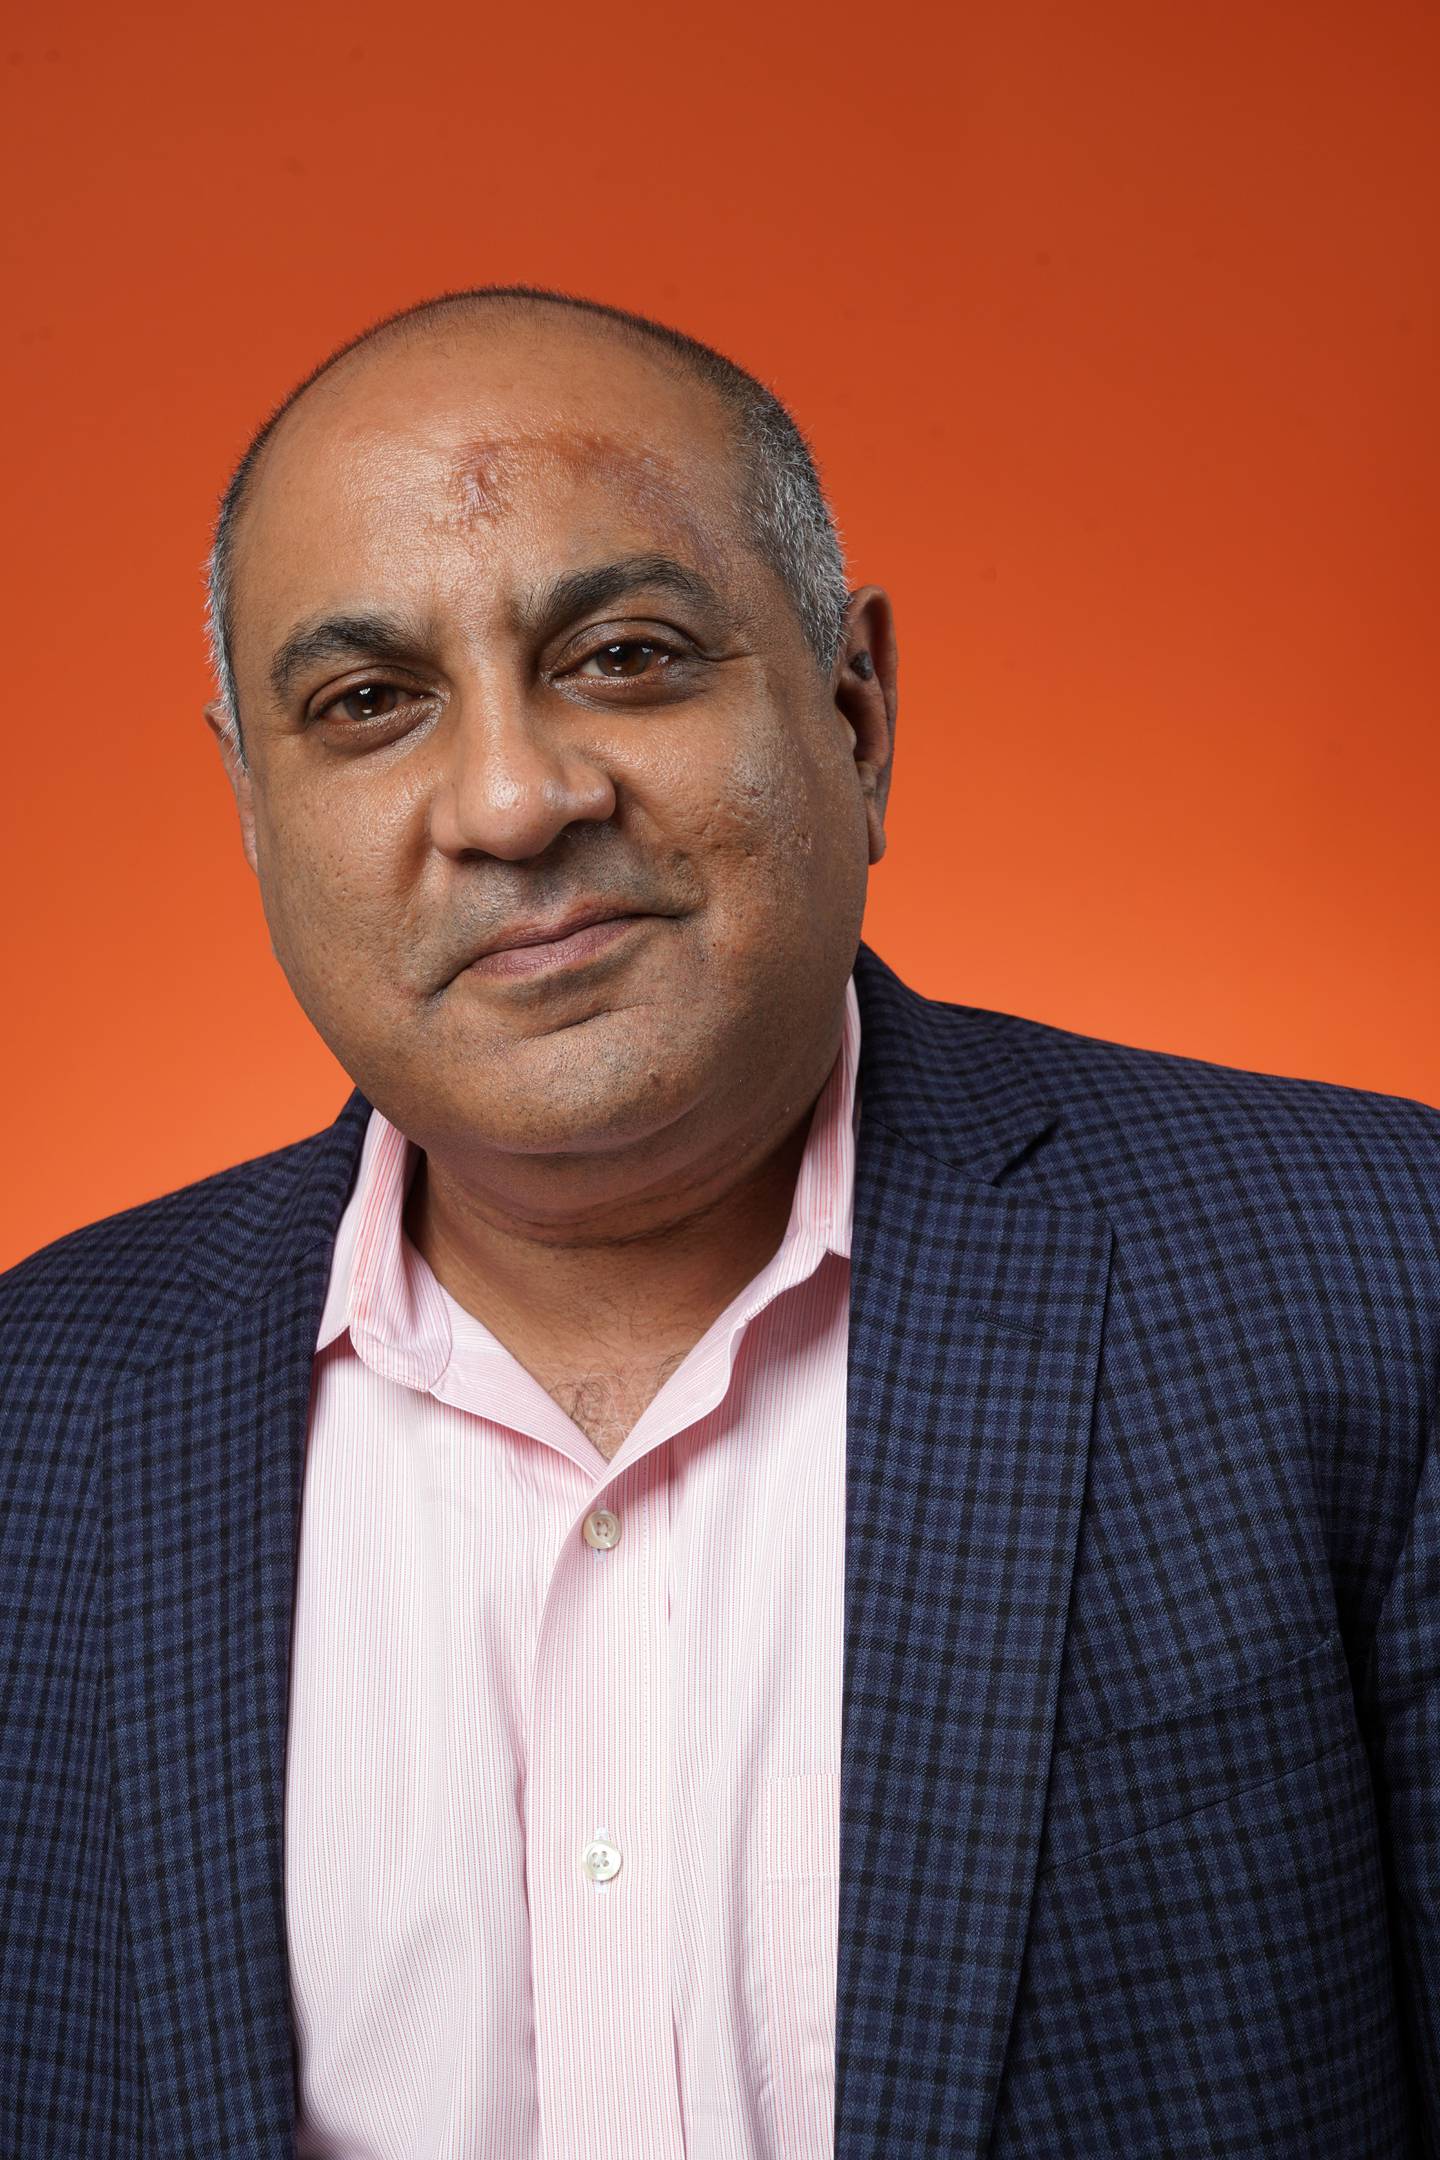 Headshot of Publisher and CEO of The Baltimore Banner, Imtiaz Patel.